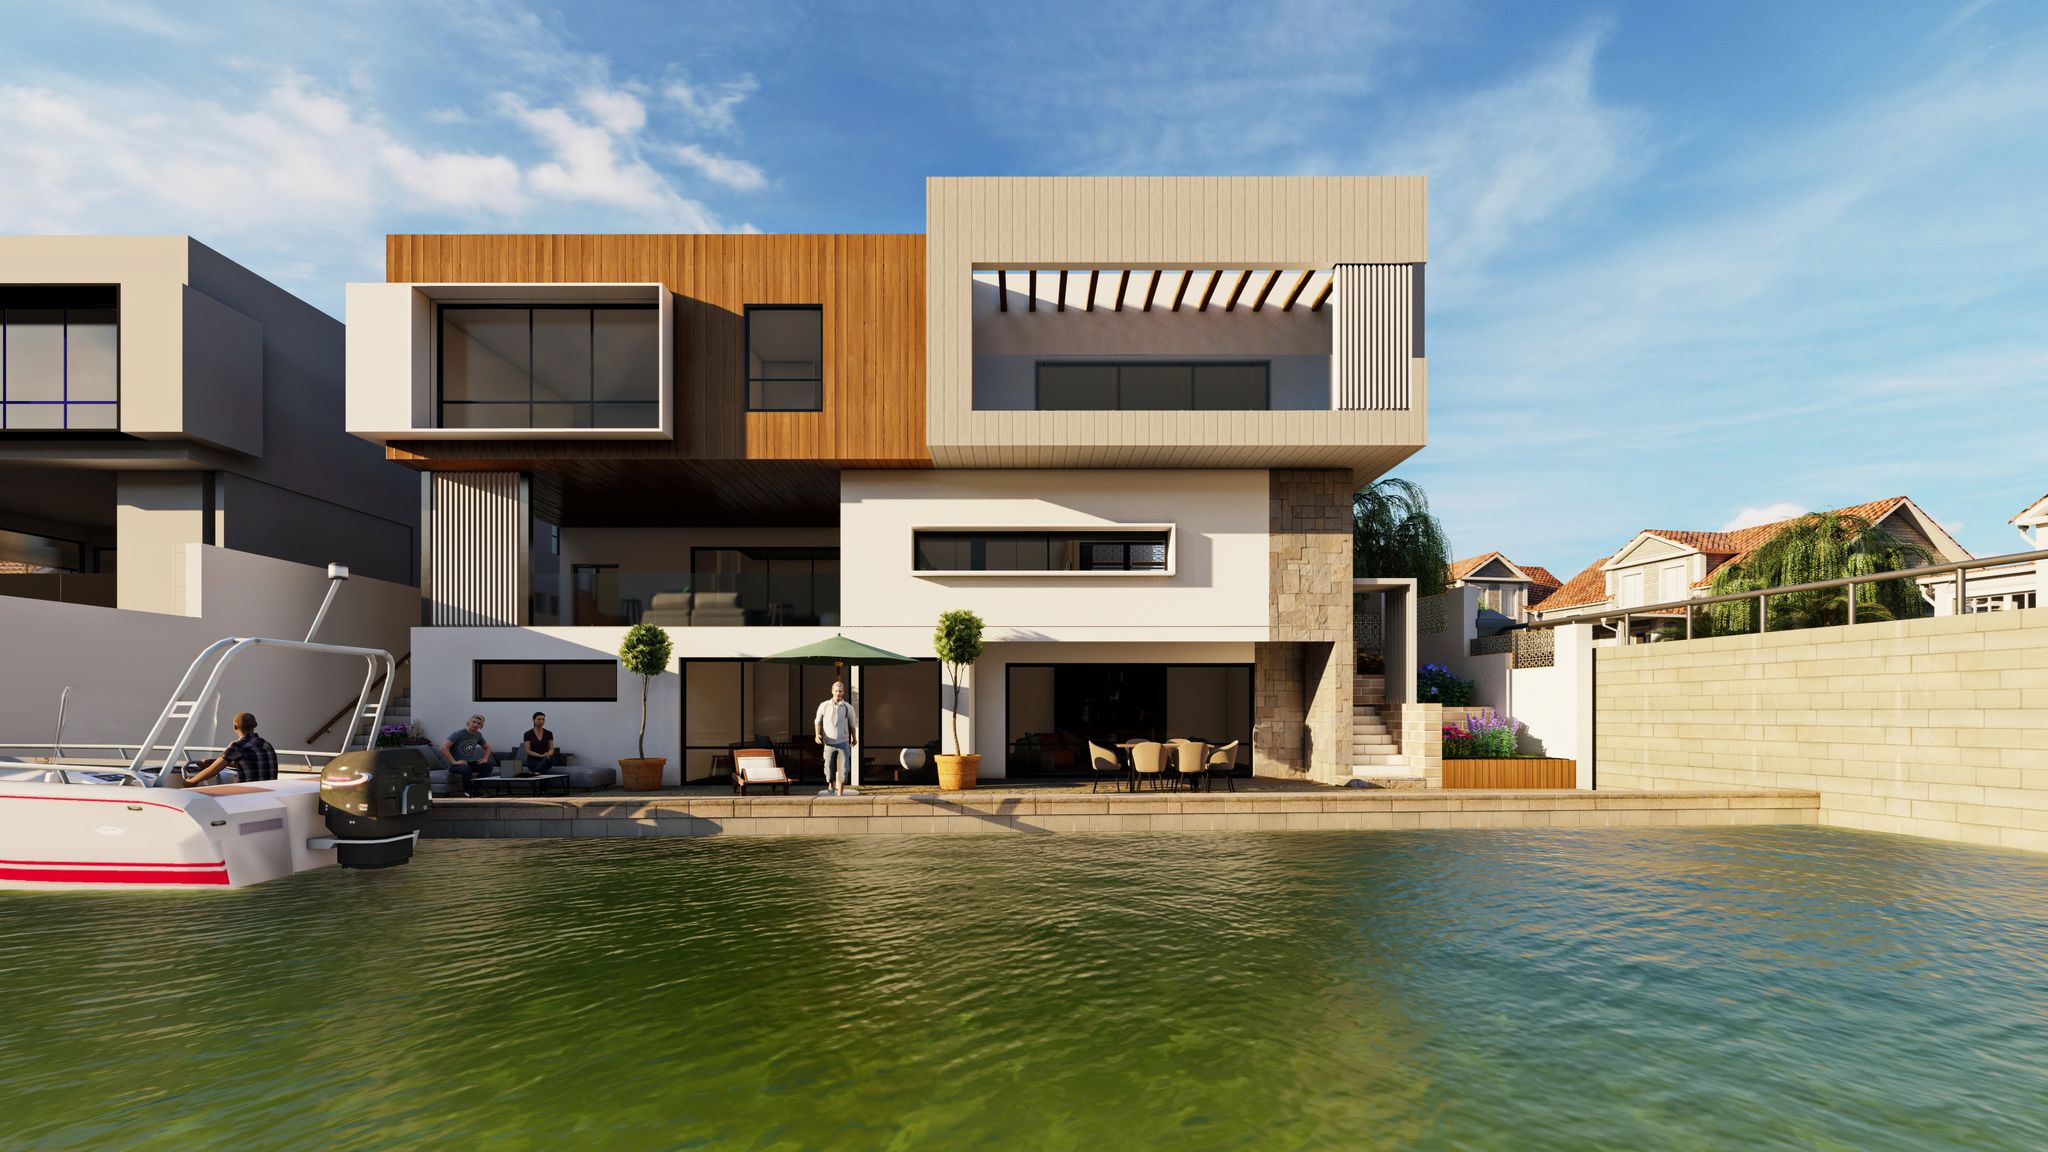 architect's rendition of private residence renovation project on canal